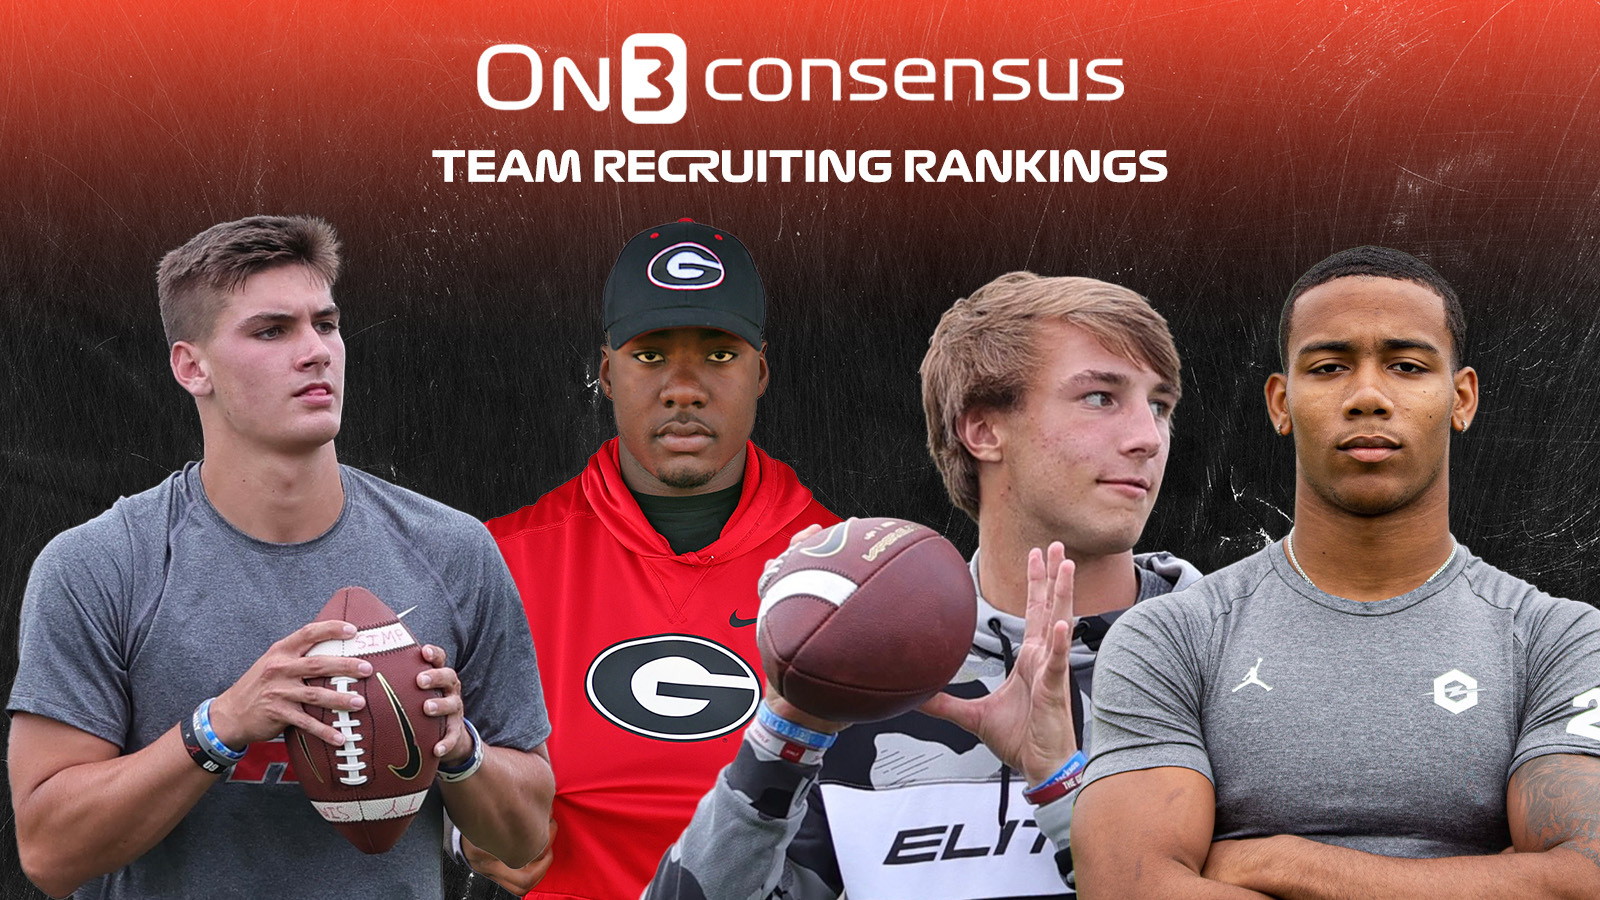 UNC Football At No. 10 In Updated 2022 On3 Consensus Team Recruiting Rankings